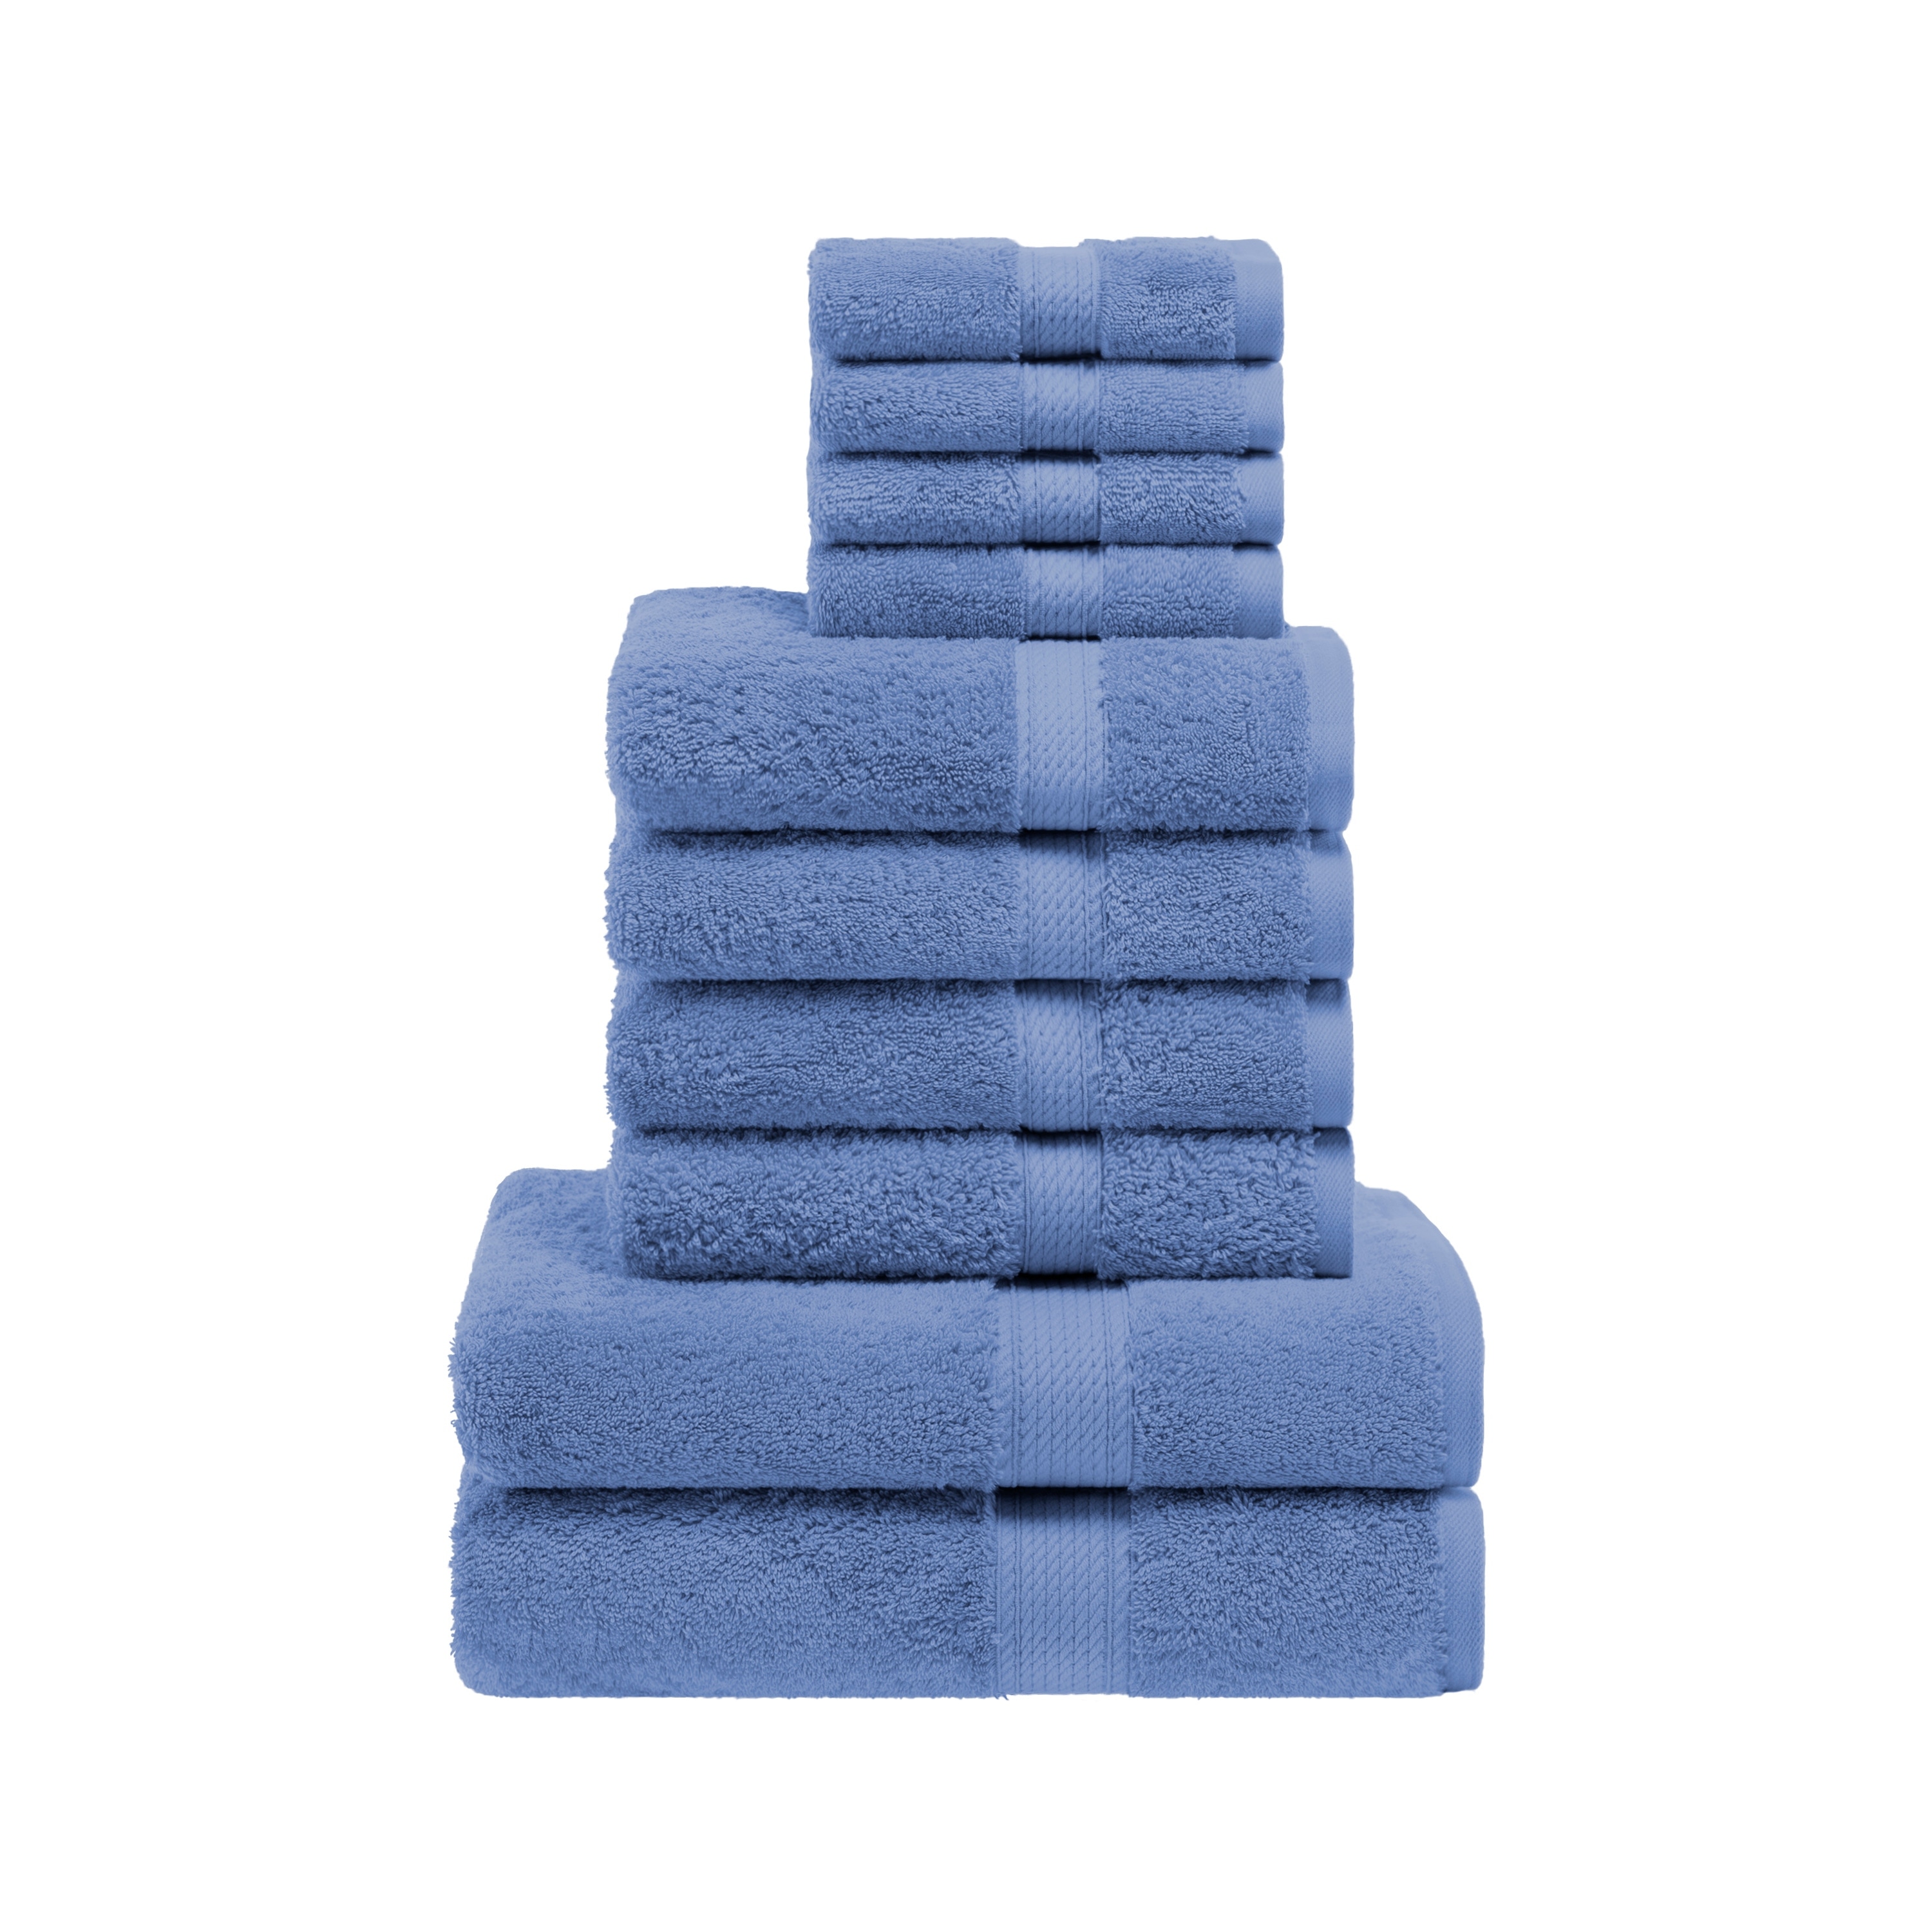 https://ak1.ostkcdn.com/images/products/is/images/direct/efd0701a9b62820ff791f4b5fd54a5925926304b/Egyptian-Cotton-Heavyweight-Solid-Plush-Towel-Set-by-Superior.jpg